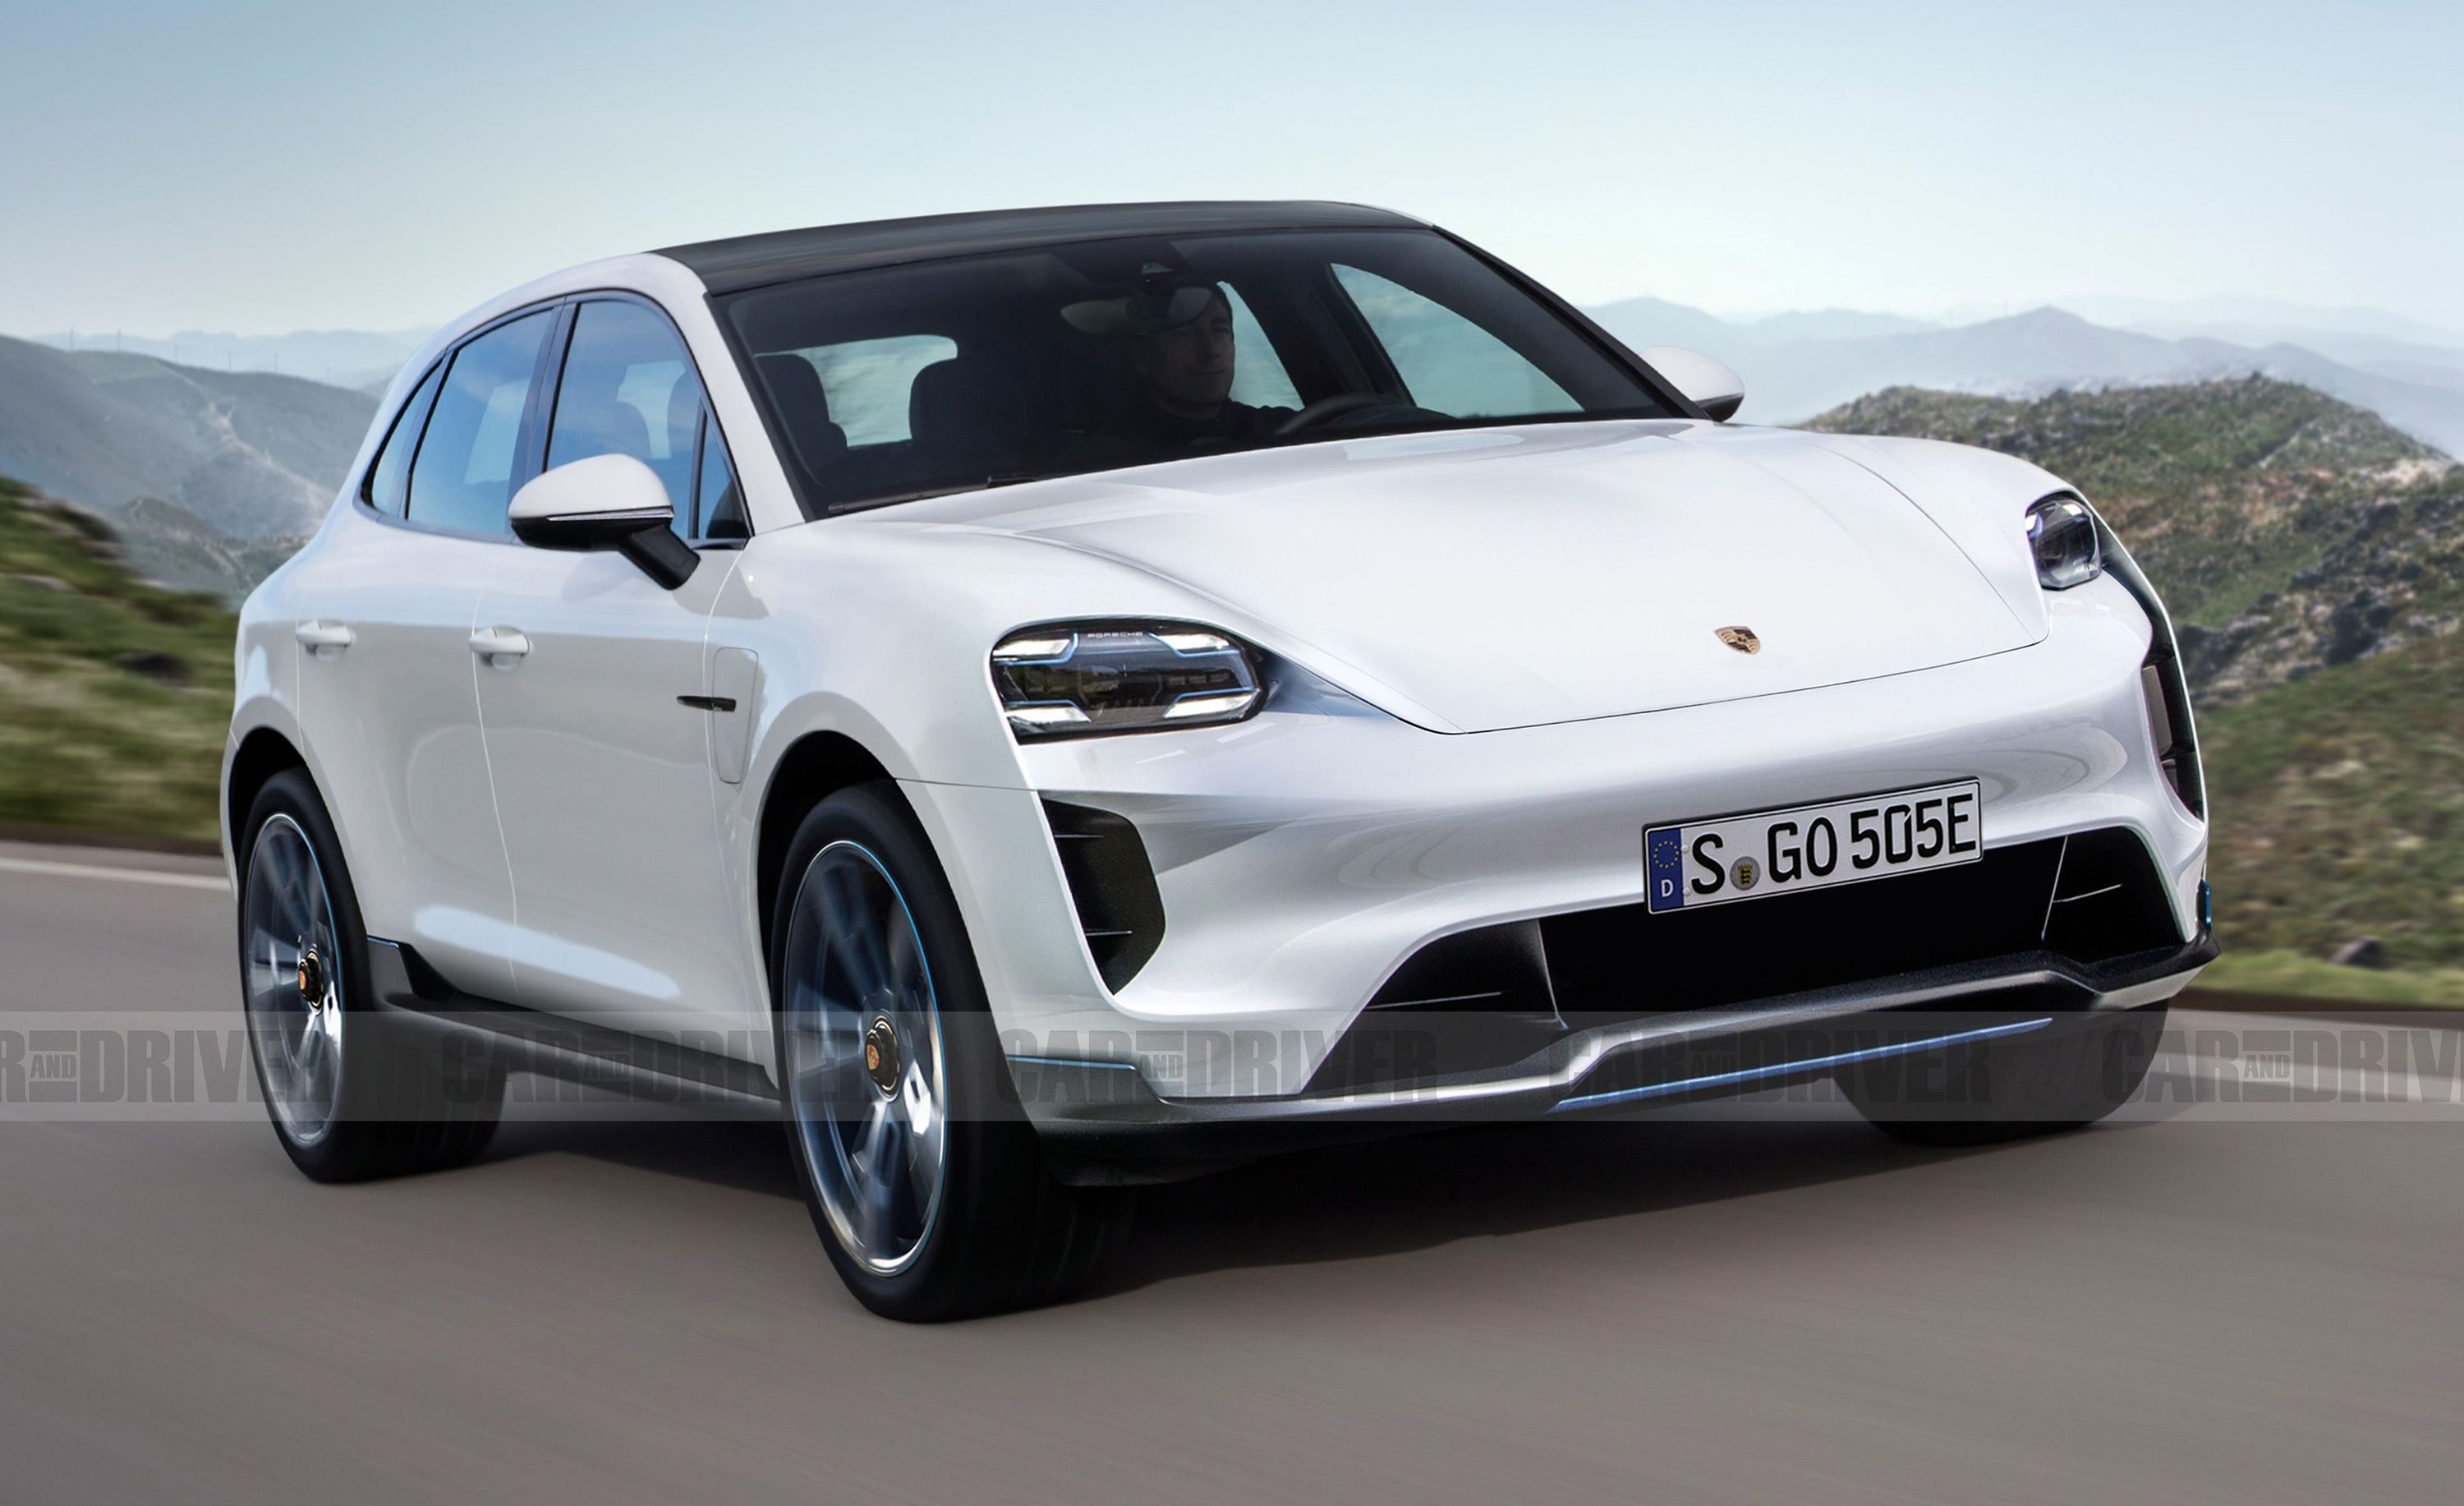 Porsche Macan Crossover Will Be Fully Electric in Next Generation